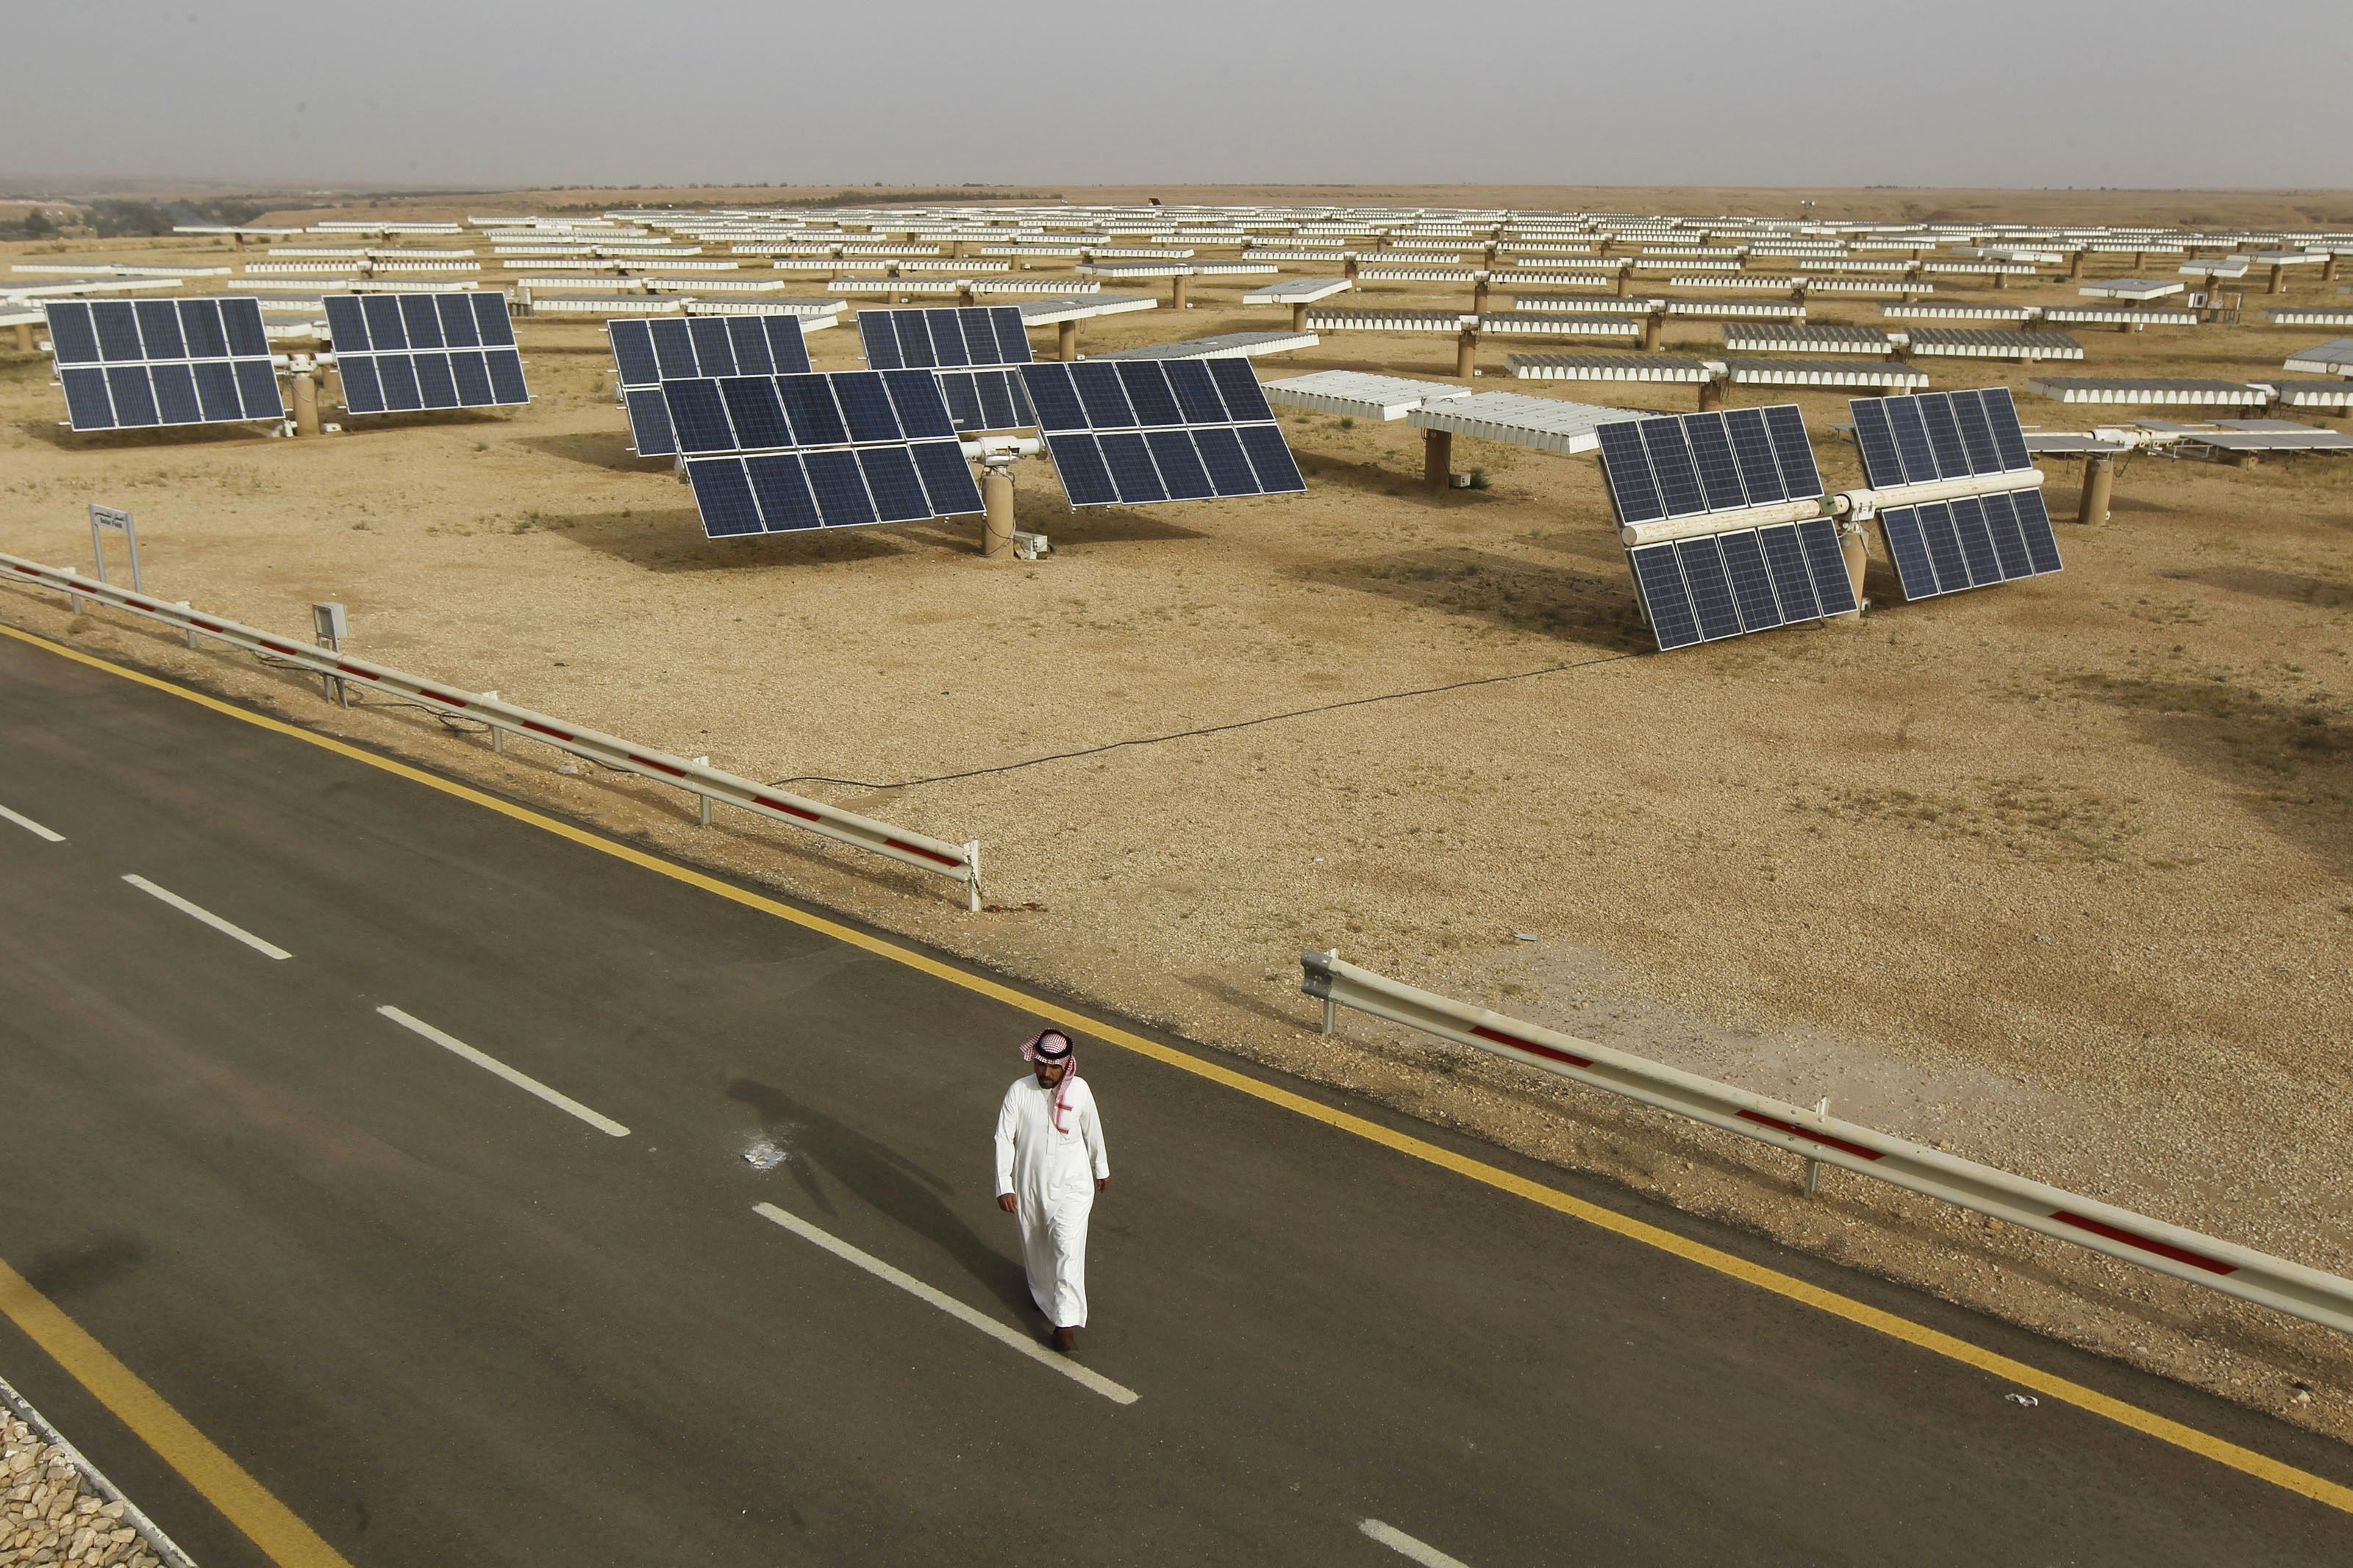 UK and Saudi Arabia look to 'join hands' in clean energy innovation